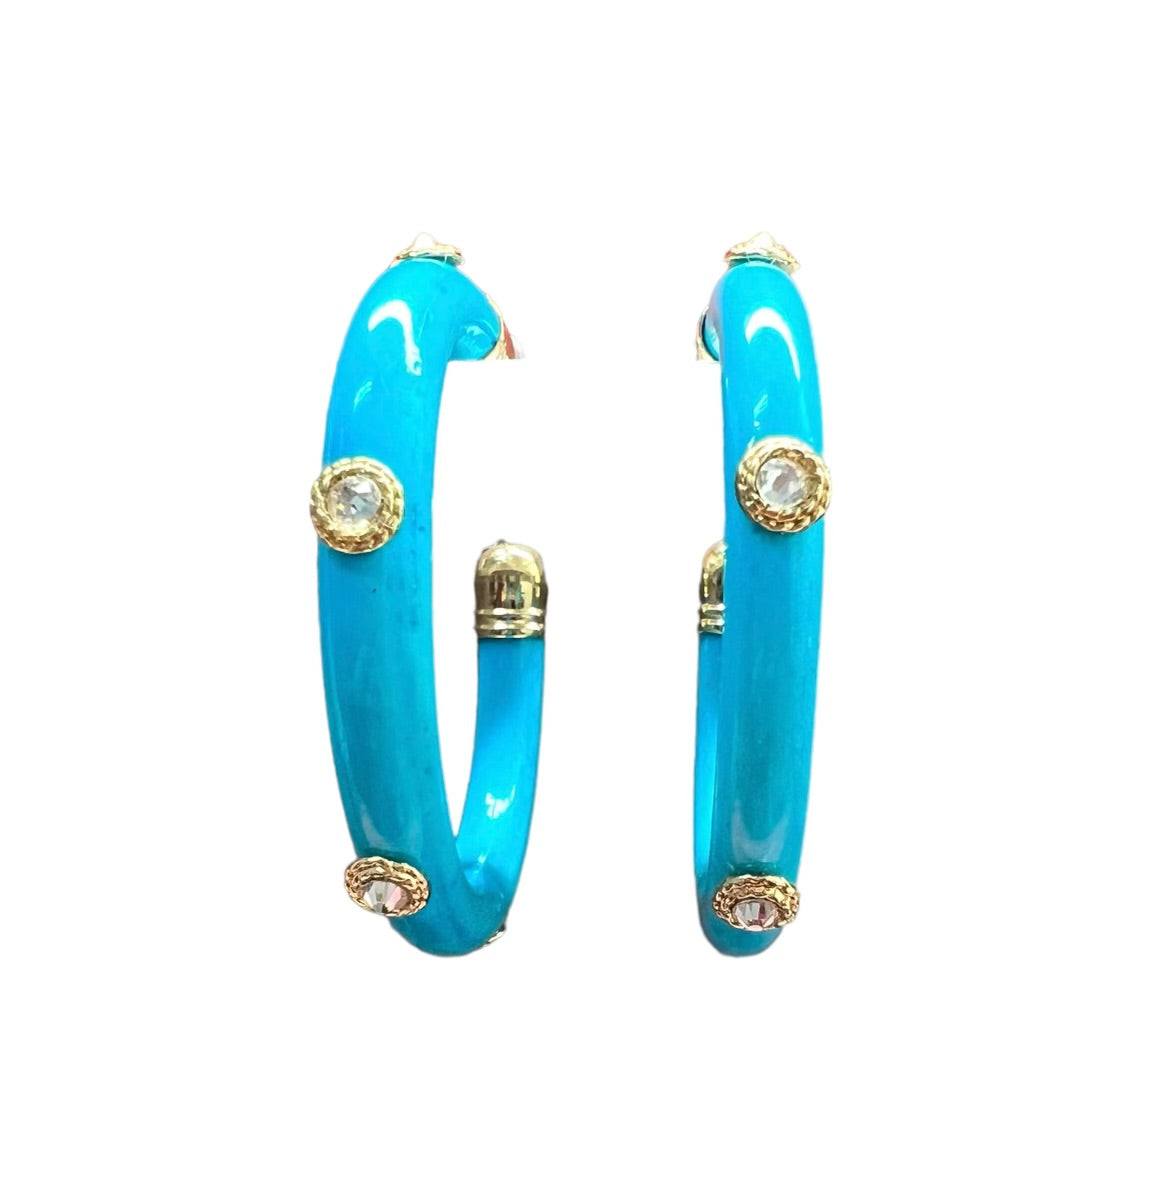 Candied Jewel Hoop Earrings (available in many colors)